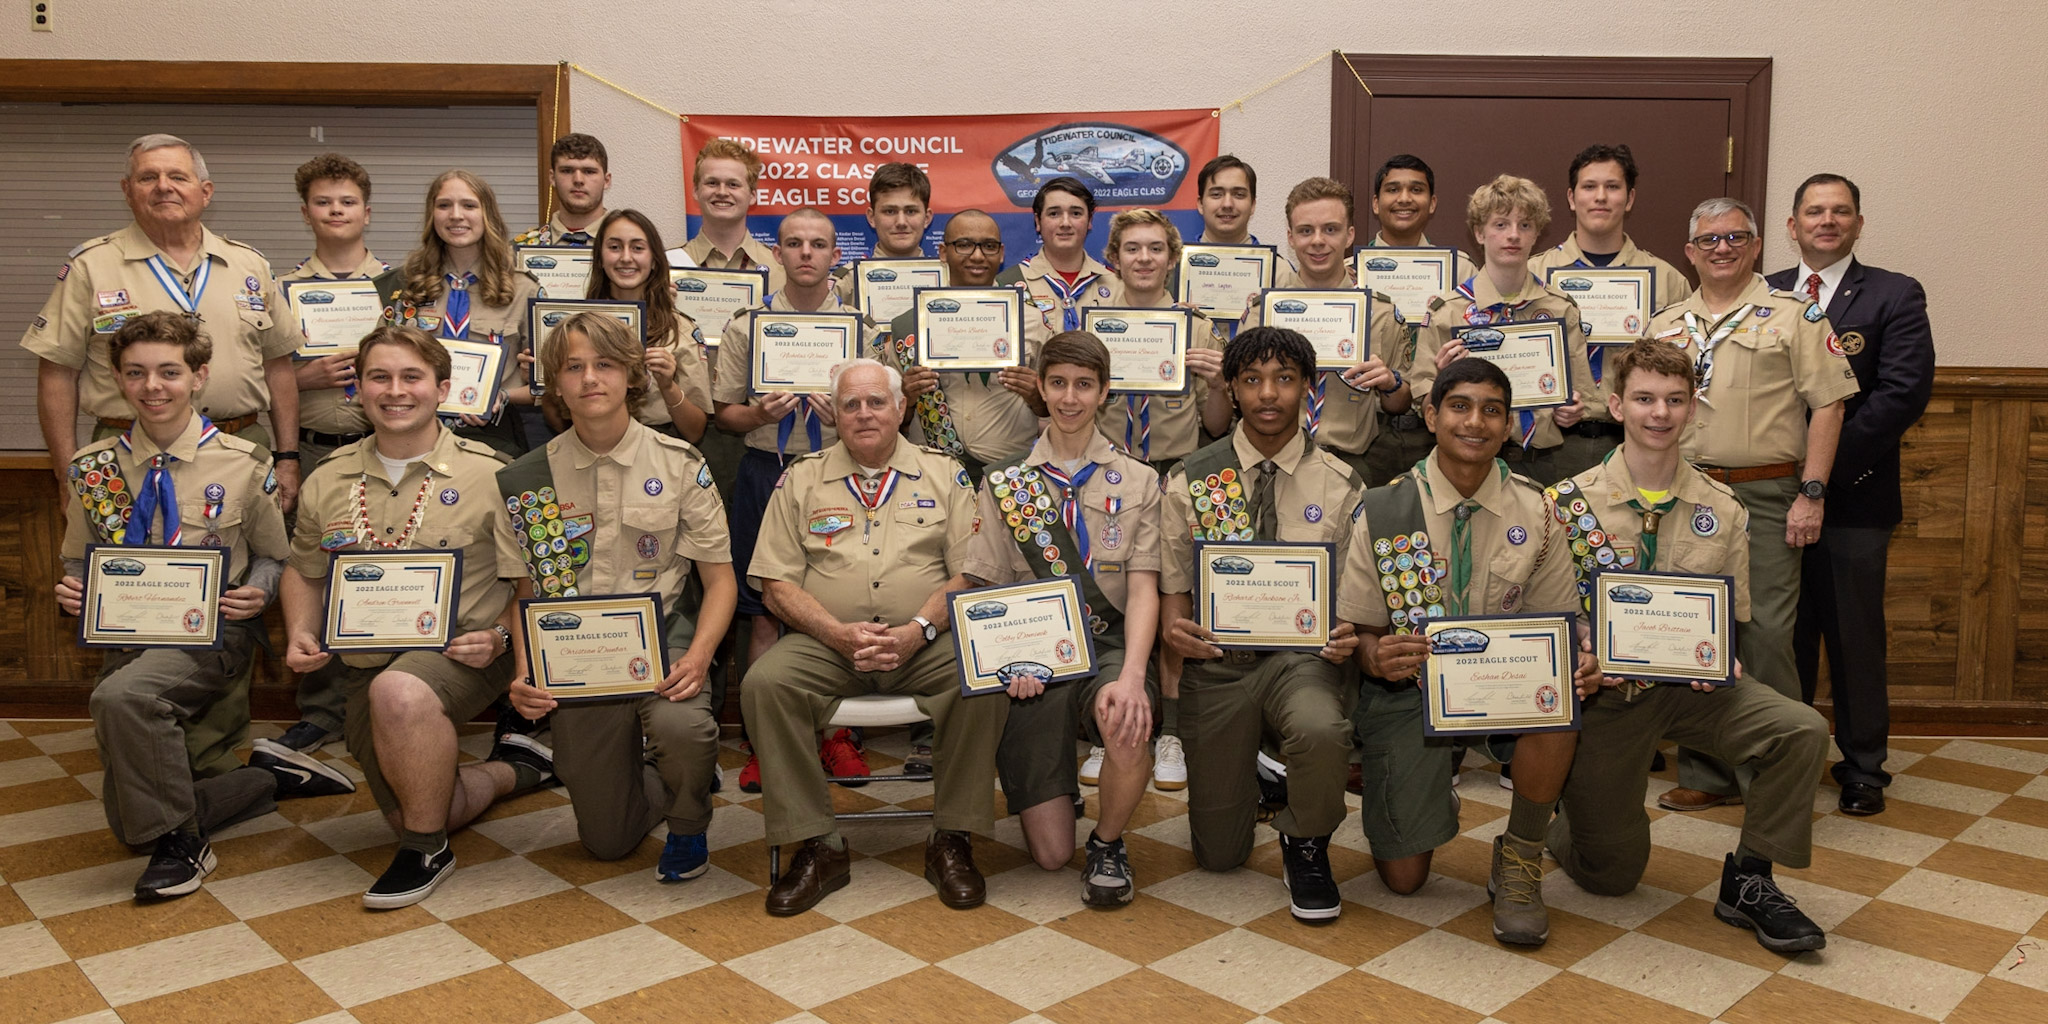 2022 Class of Eagle Scouts